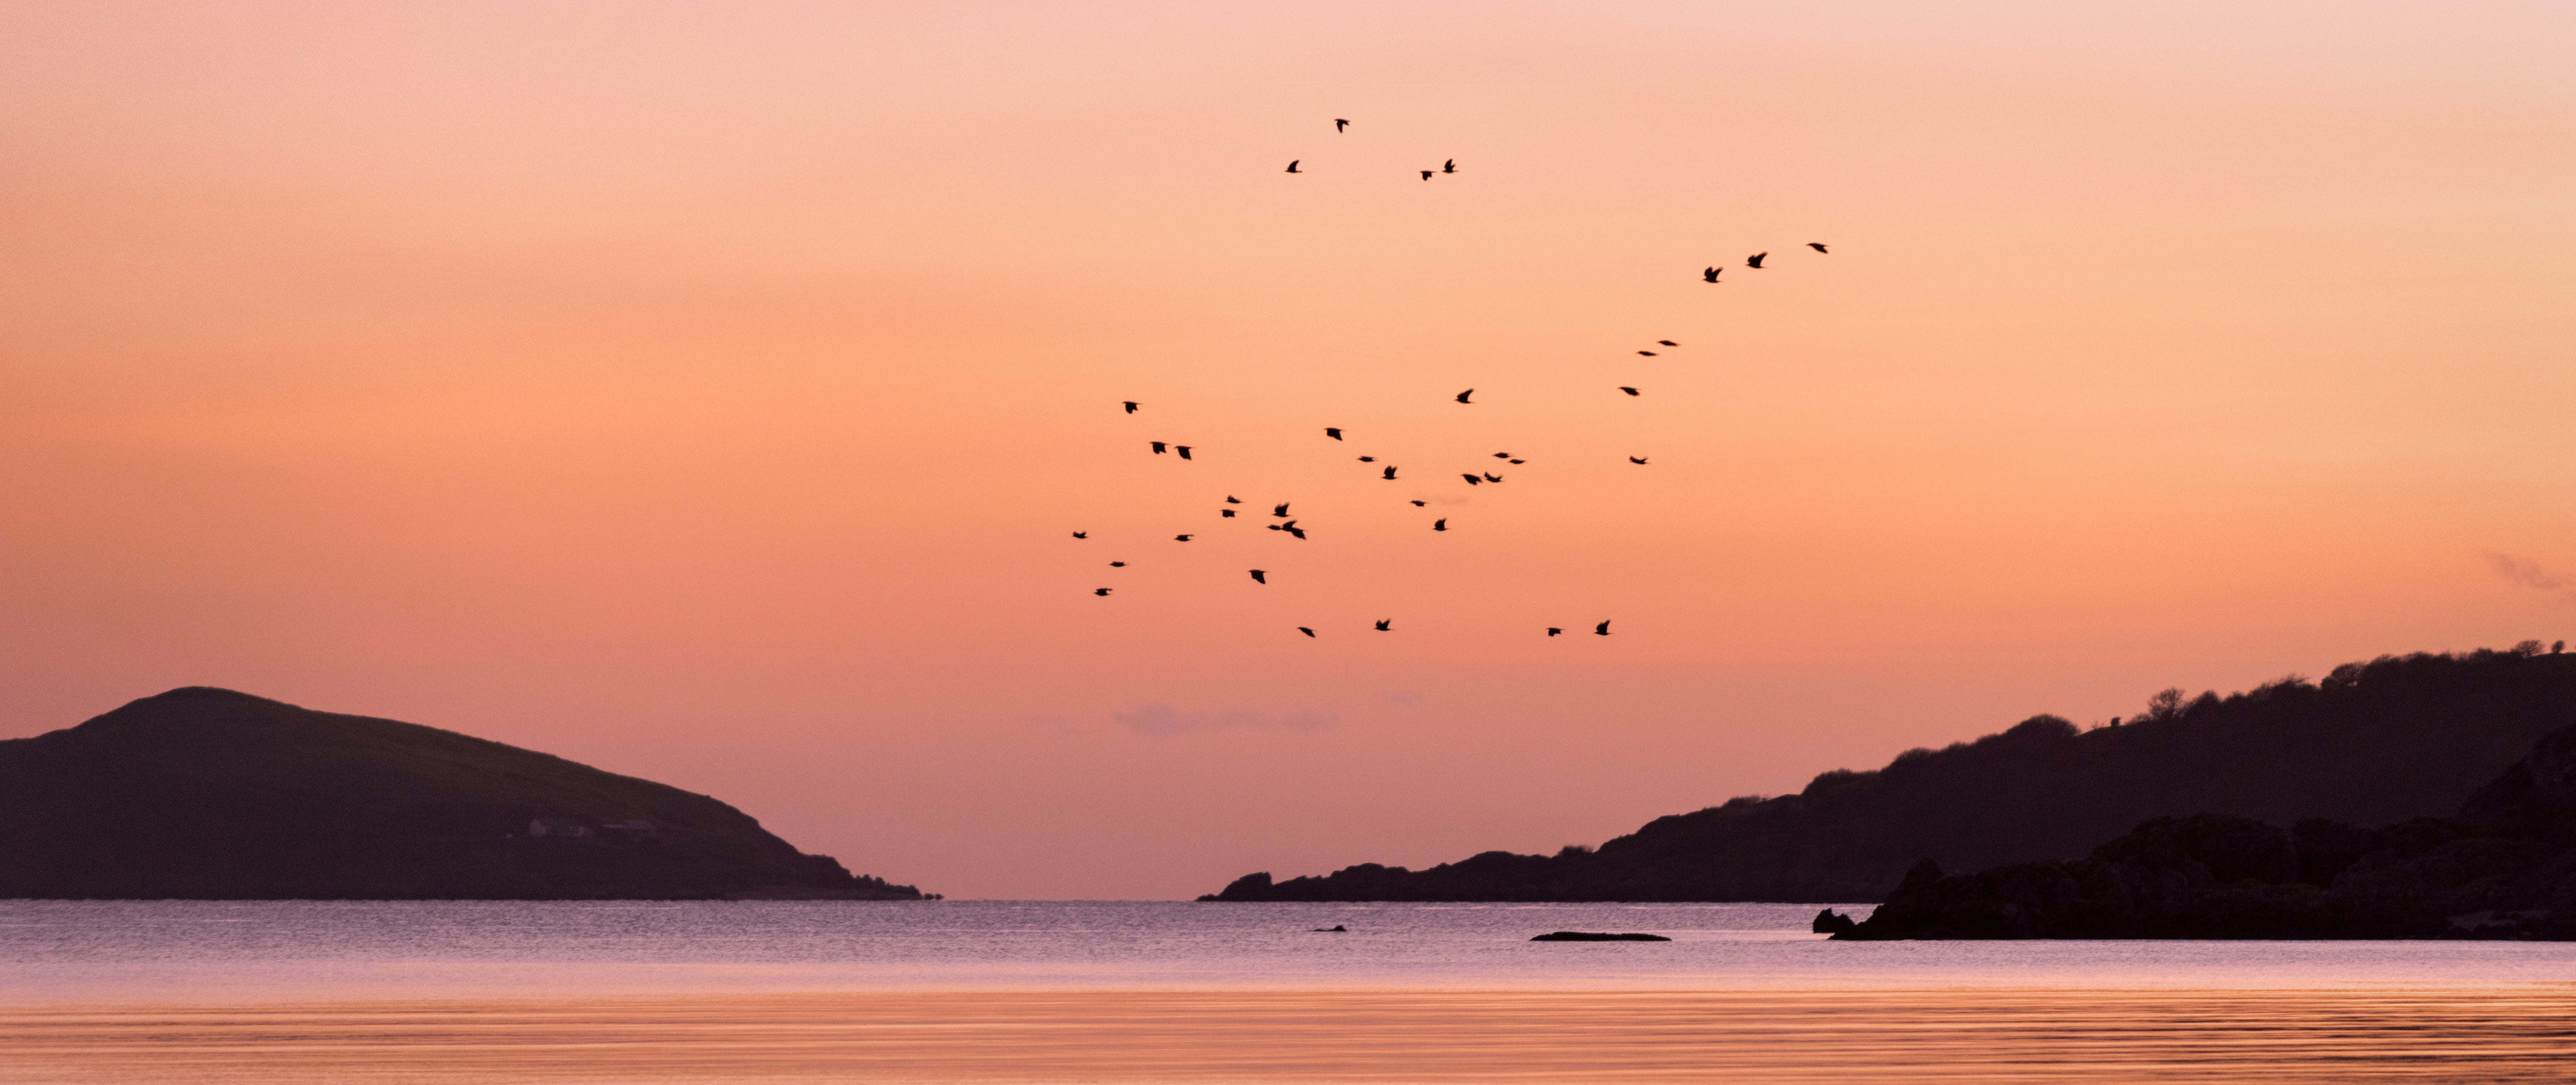 Birds flying over sea with silhouette of mountain during